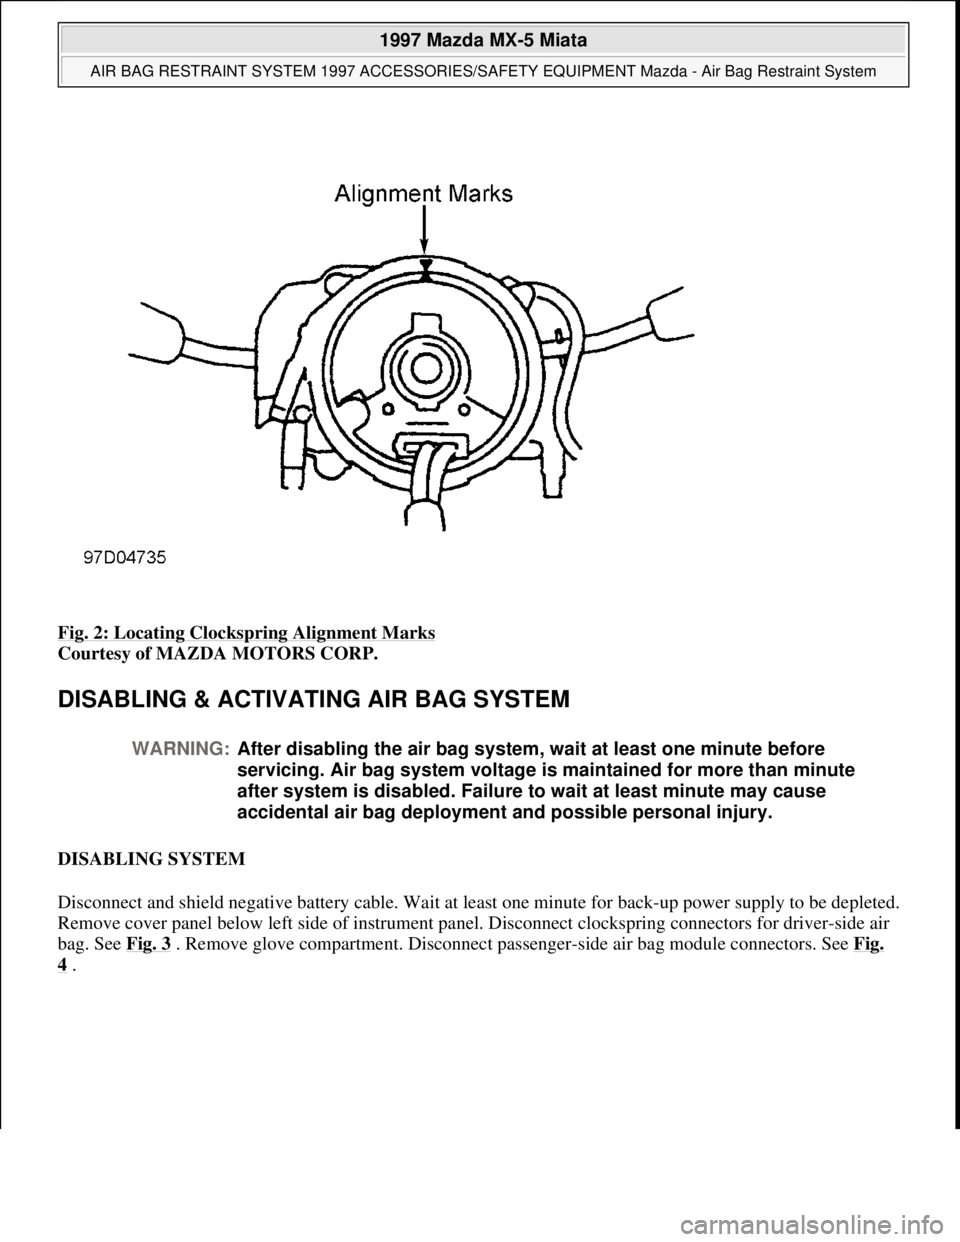 MAZDA MIATA 1997  Factory Repair Manual Fig. 2: Locating Clockspring Alignment Marks 
Courtesy of MAZDA MOTORS CORP.  
DISABLING & ACTIVATING AIR BAG SYSTEM 
DISABLING SYSTEM 
Disconnect and shield negative battery cable. Wait at least one 